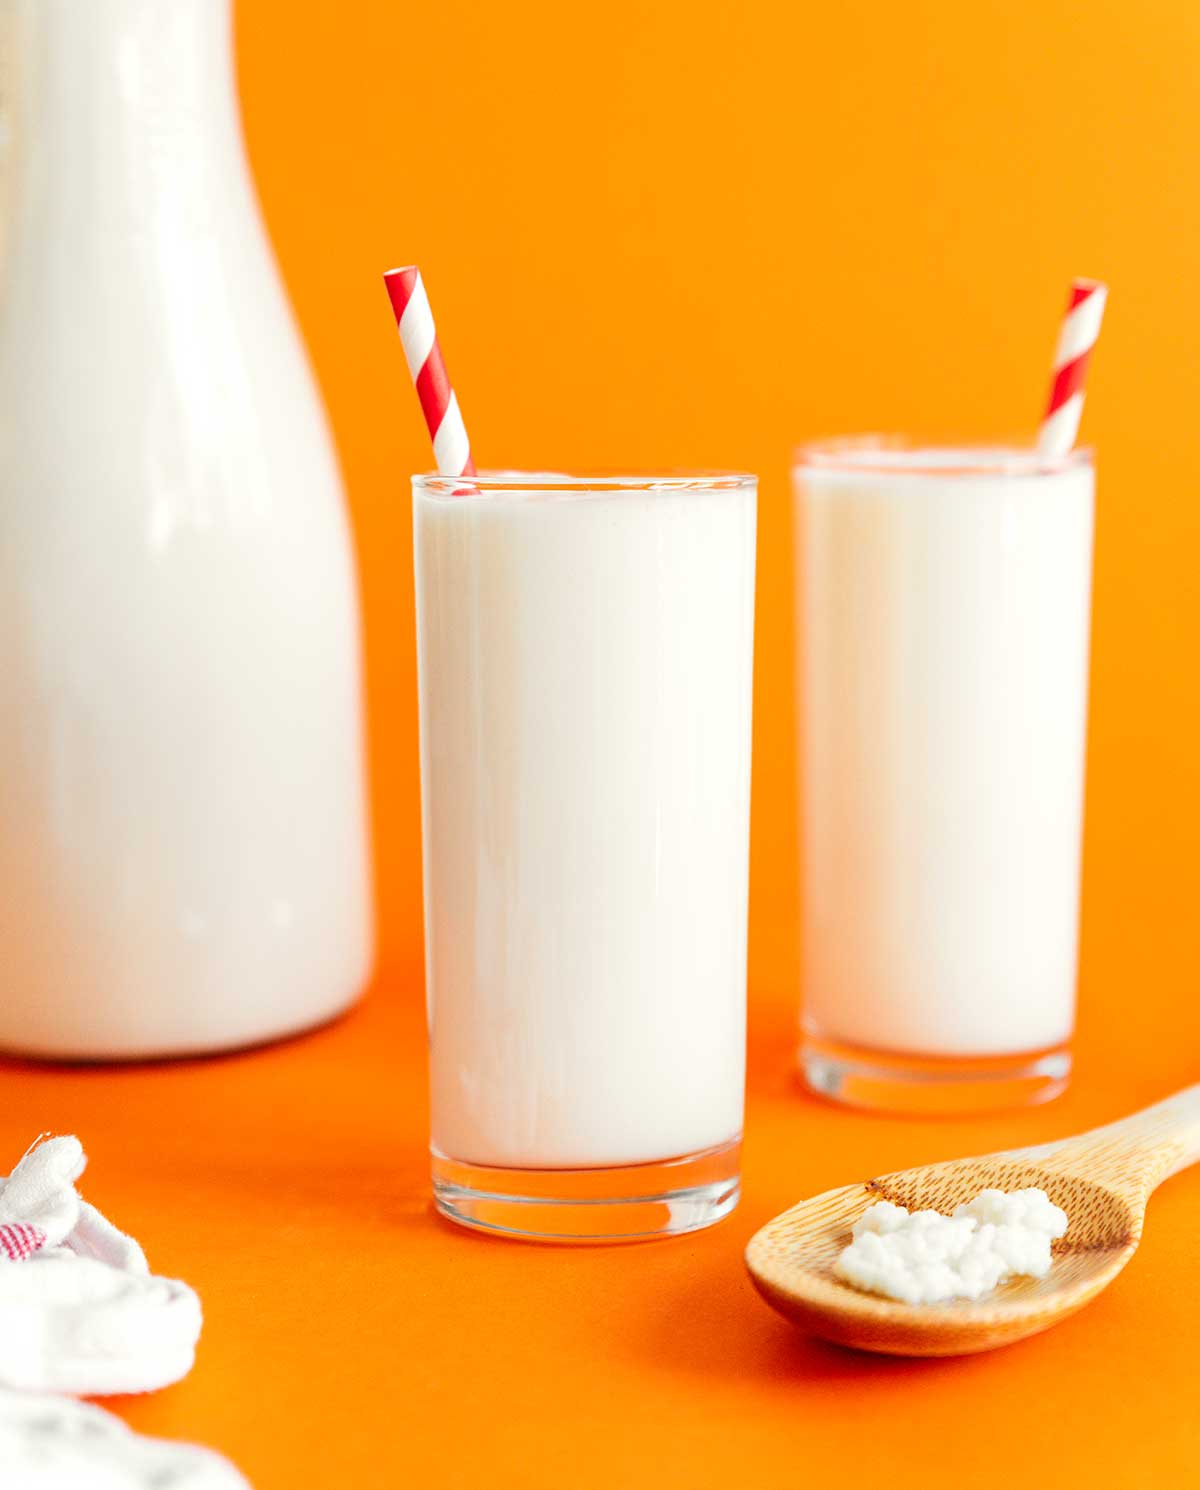 Kefir in a glass with a striped straw on an orange background